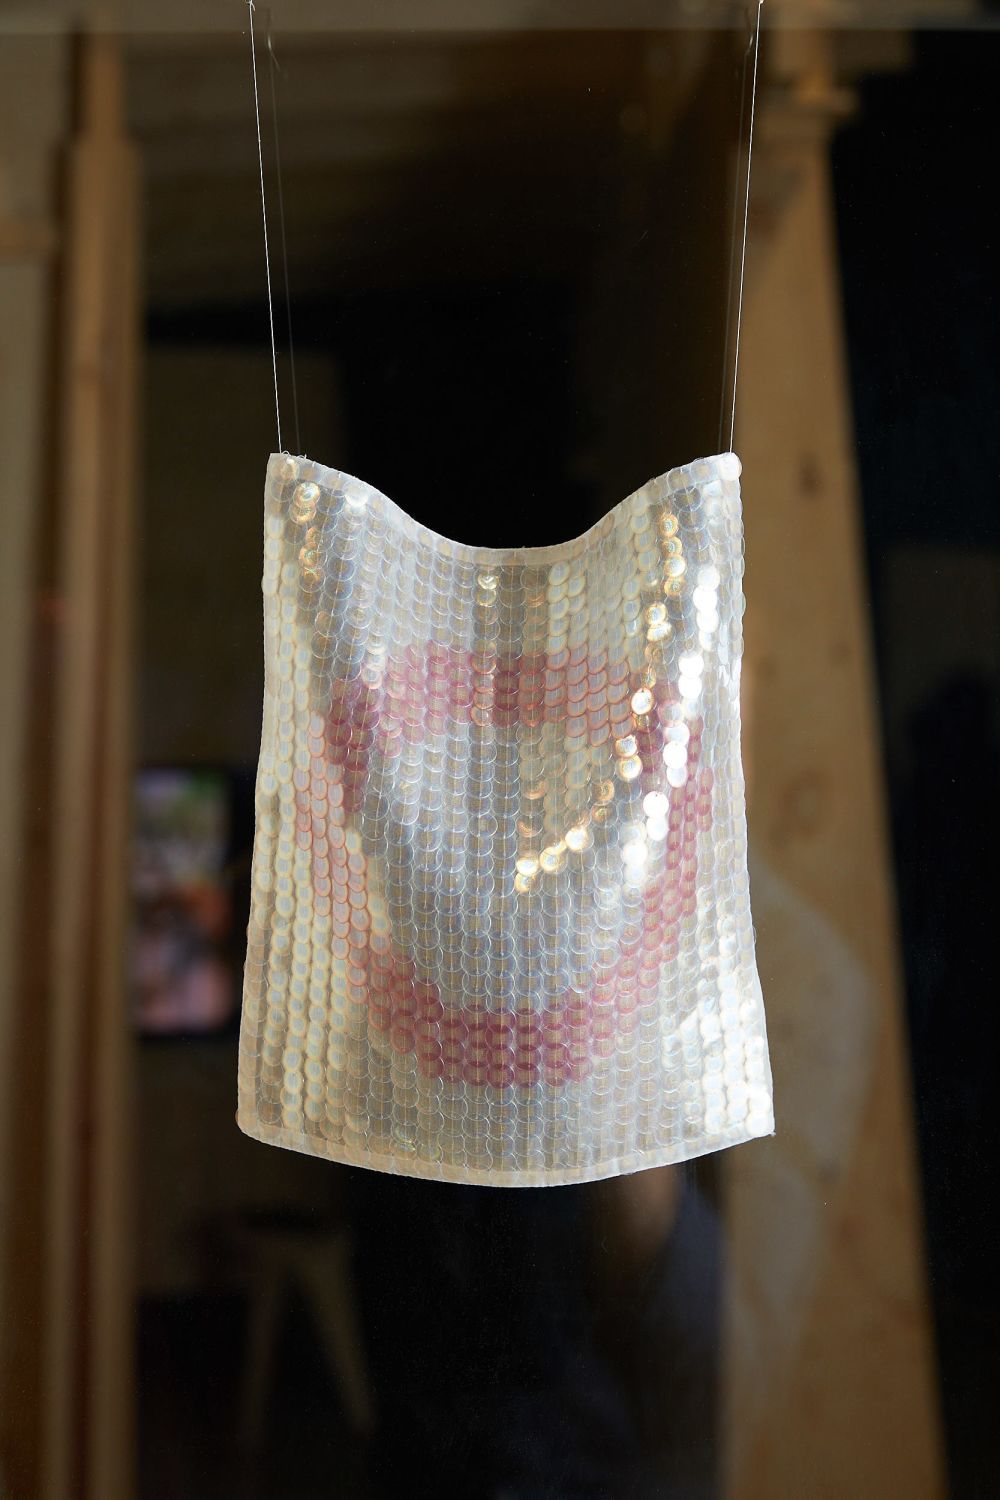 Sequins embroidered onto hanging textile